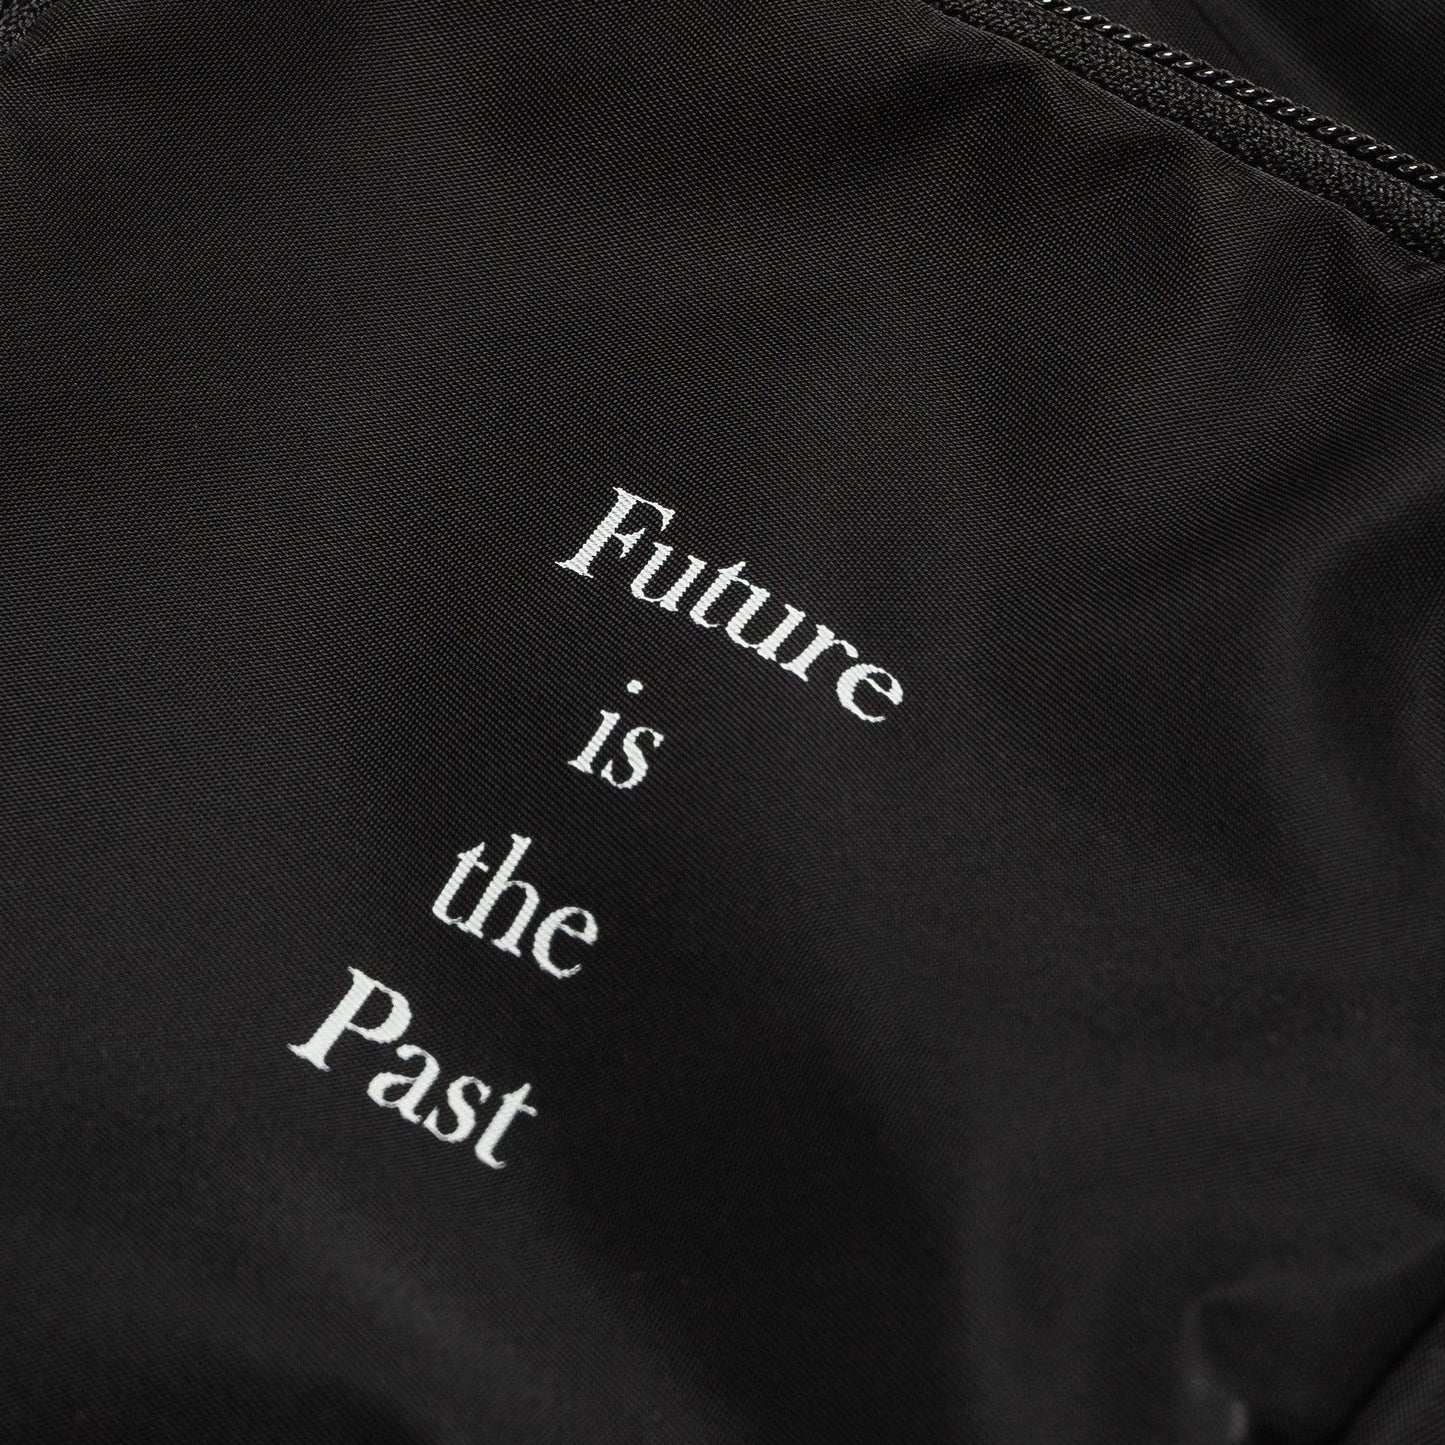 undercover pouch "future is the past" (black) - ucy4p01-3 - a.plus - Image - 3